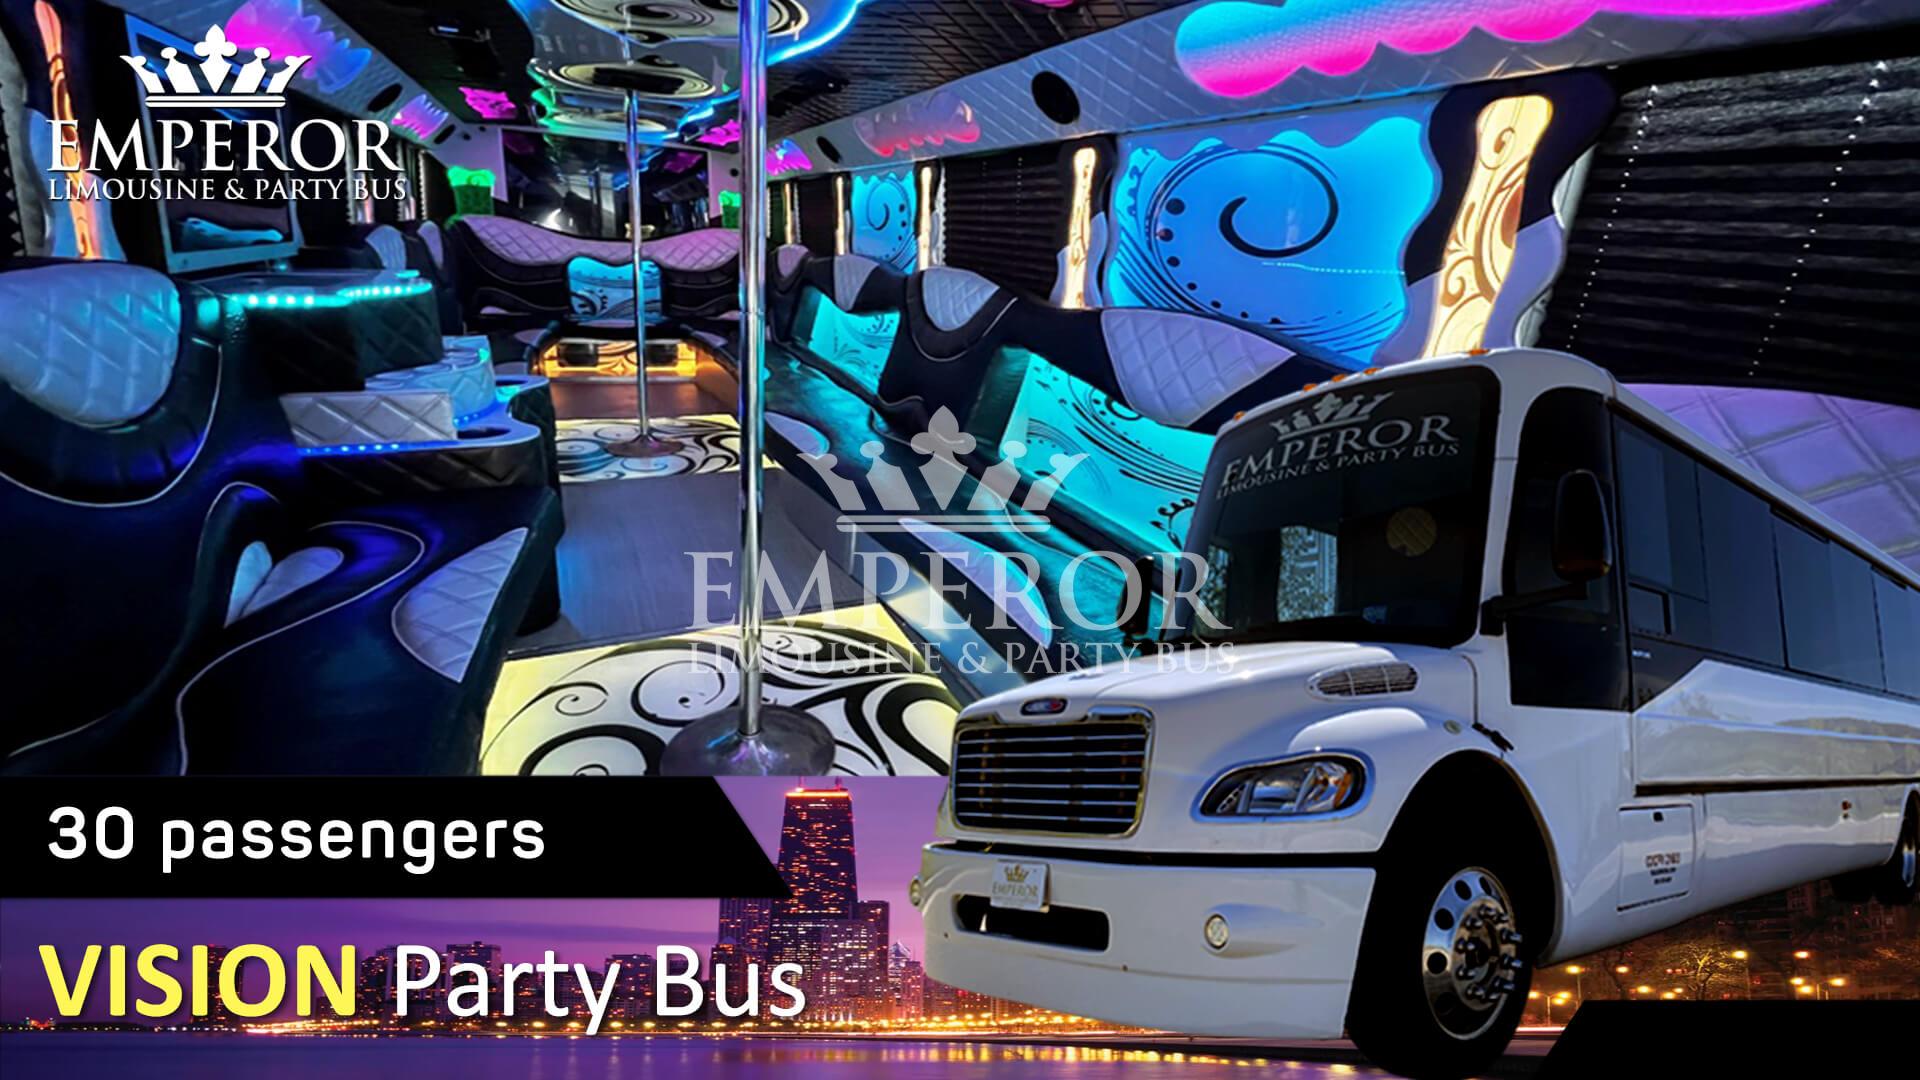 Bellwood party bus - Vision Edition